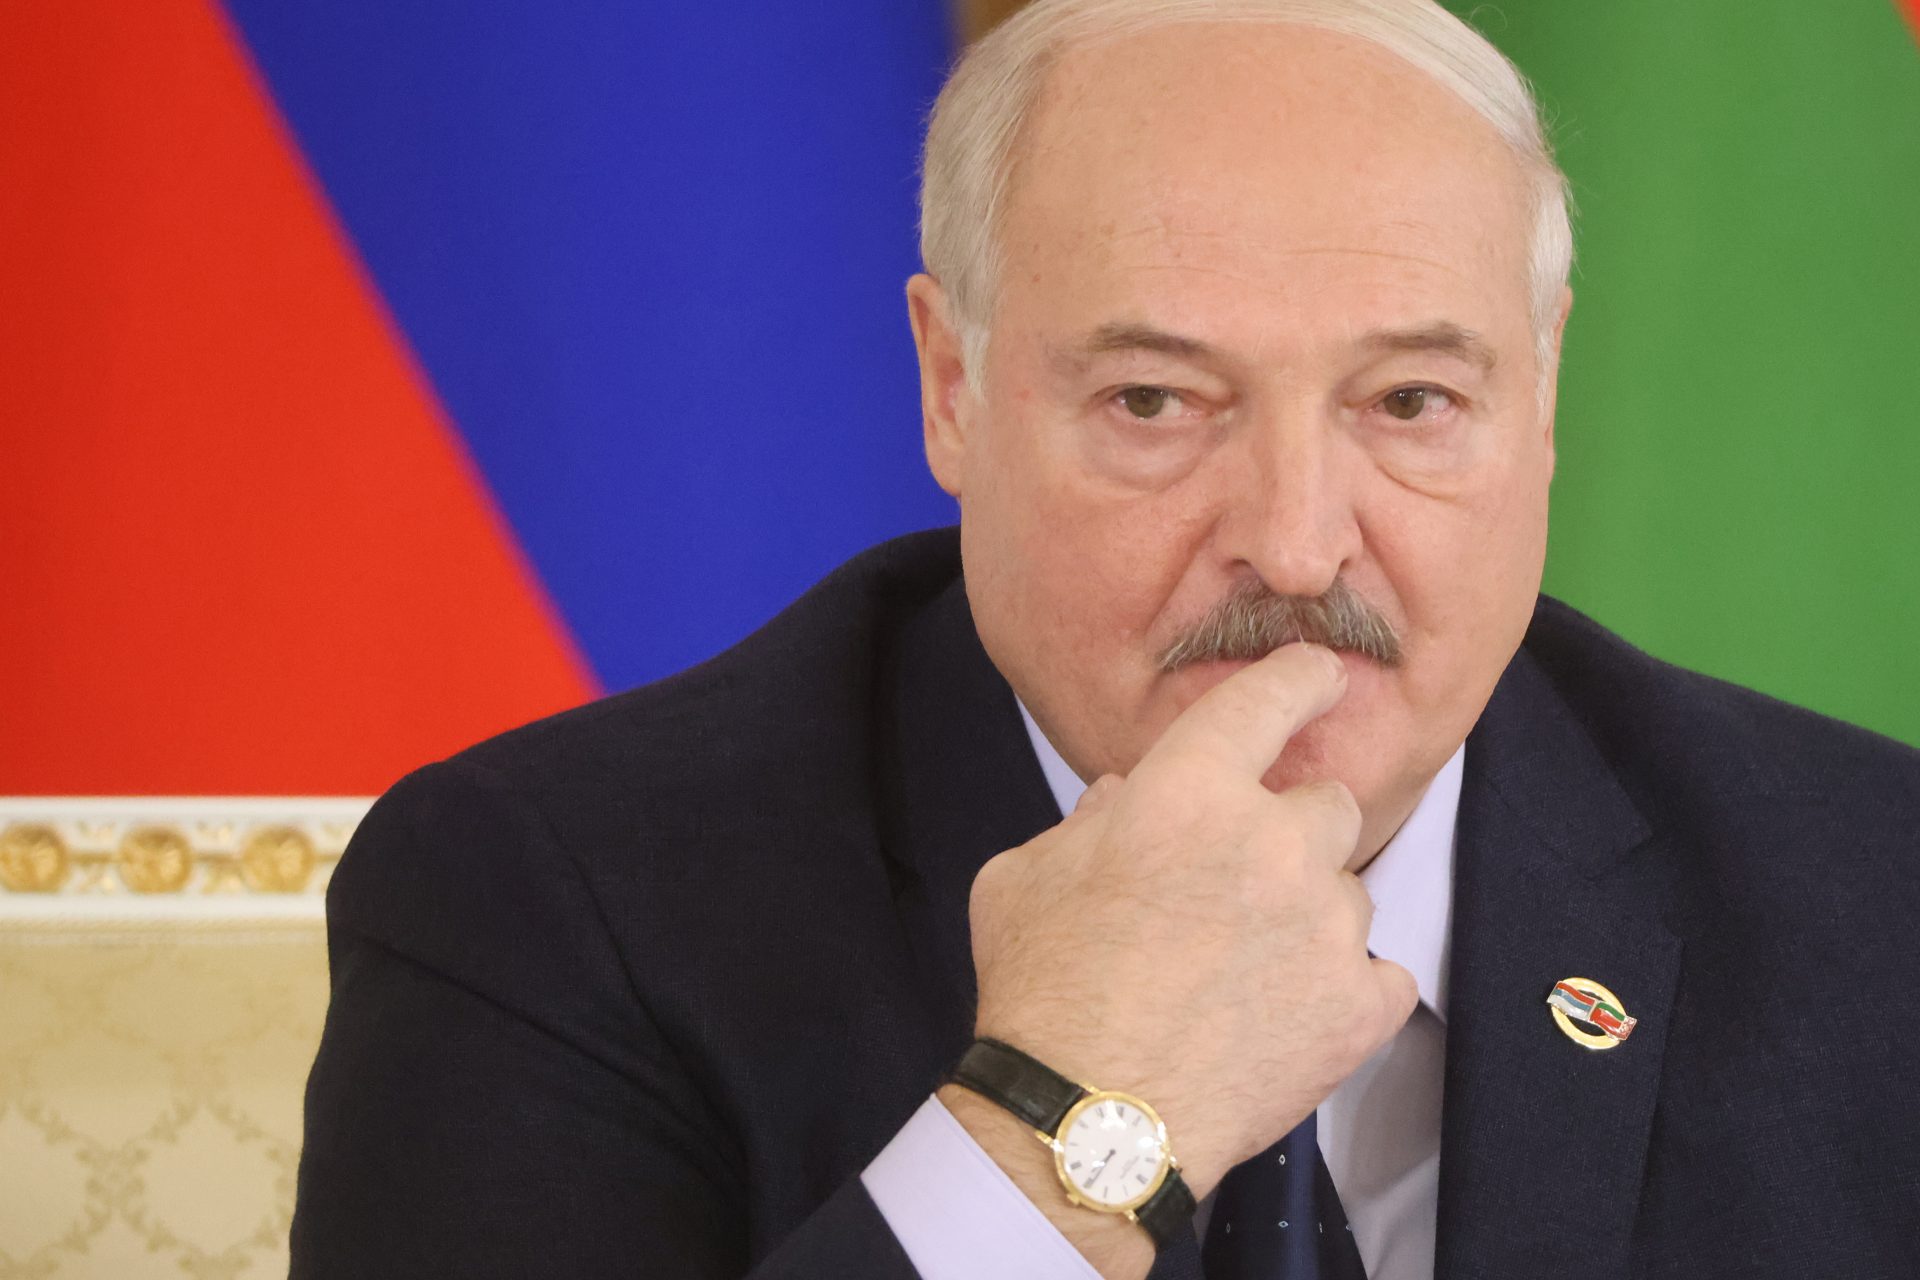 Belarusian partisans reveal a plot is in the works to oust Lukashenko